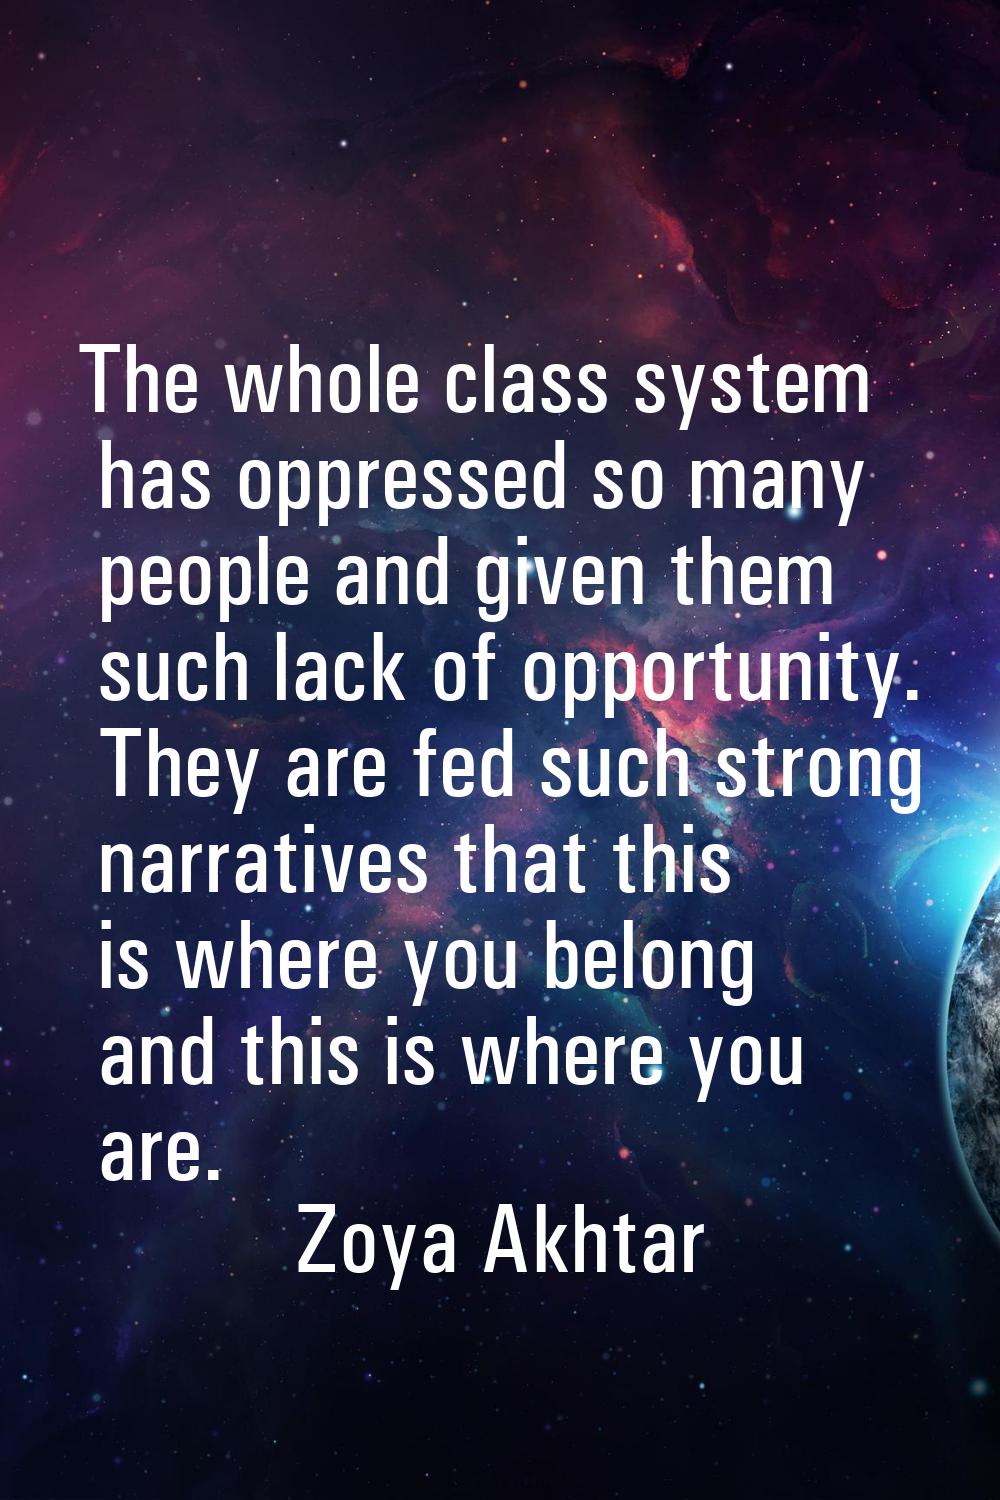 The whole class system has oppressed so many people and given them such lack of opportunity. They a